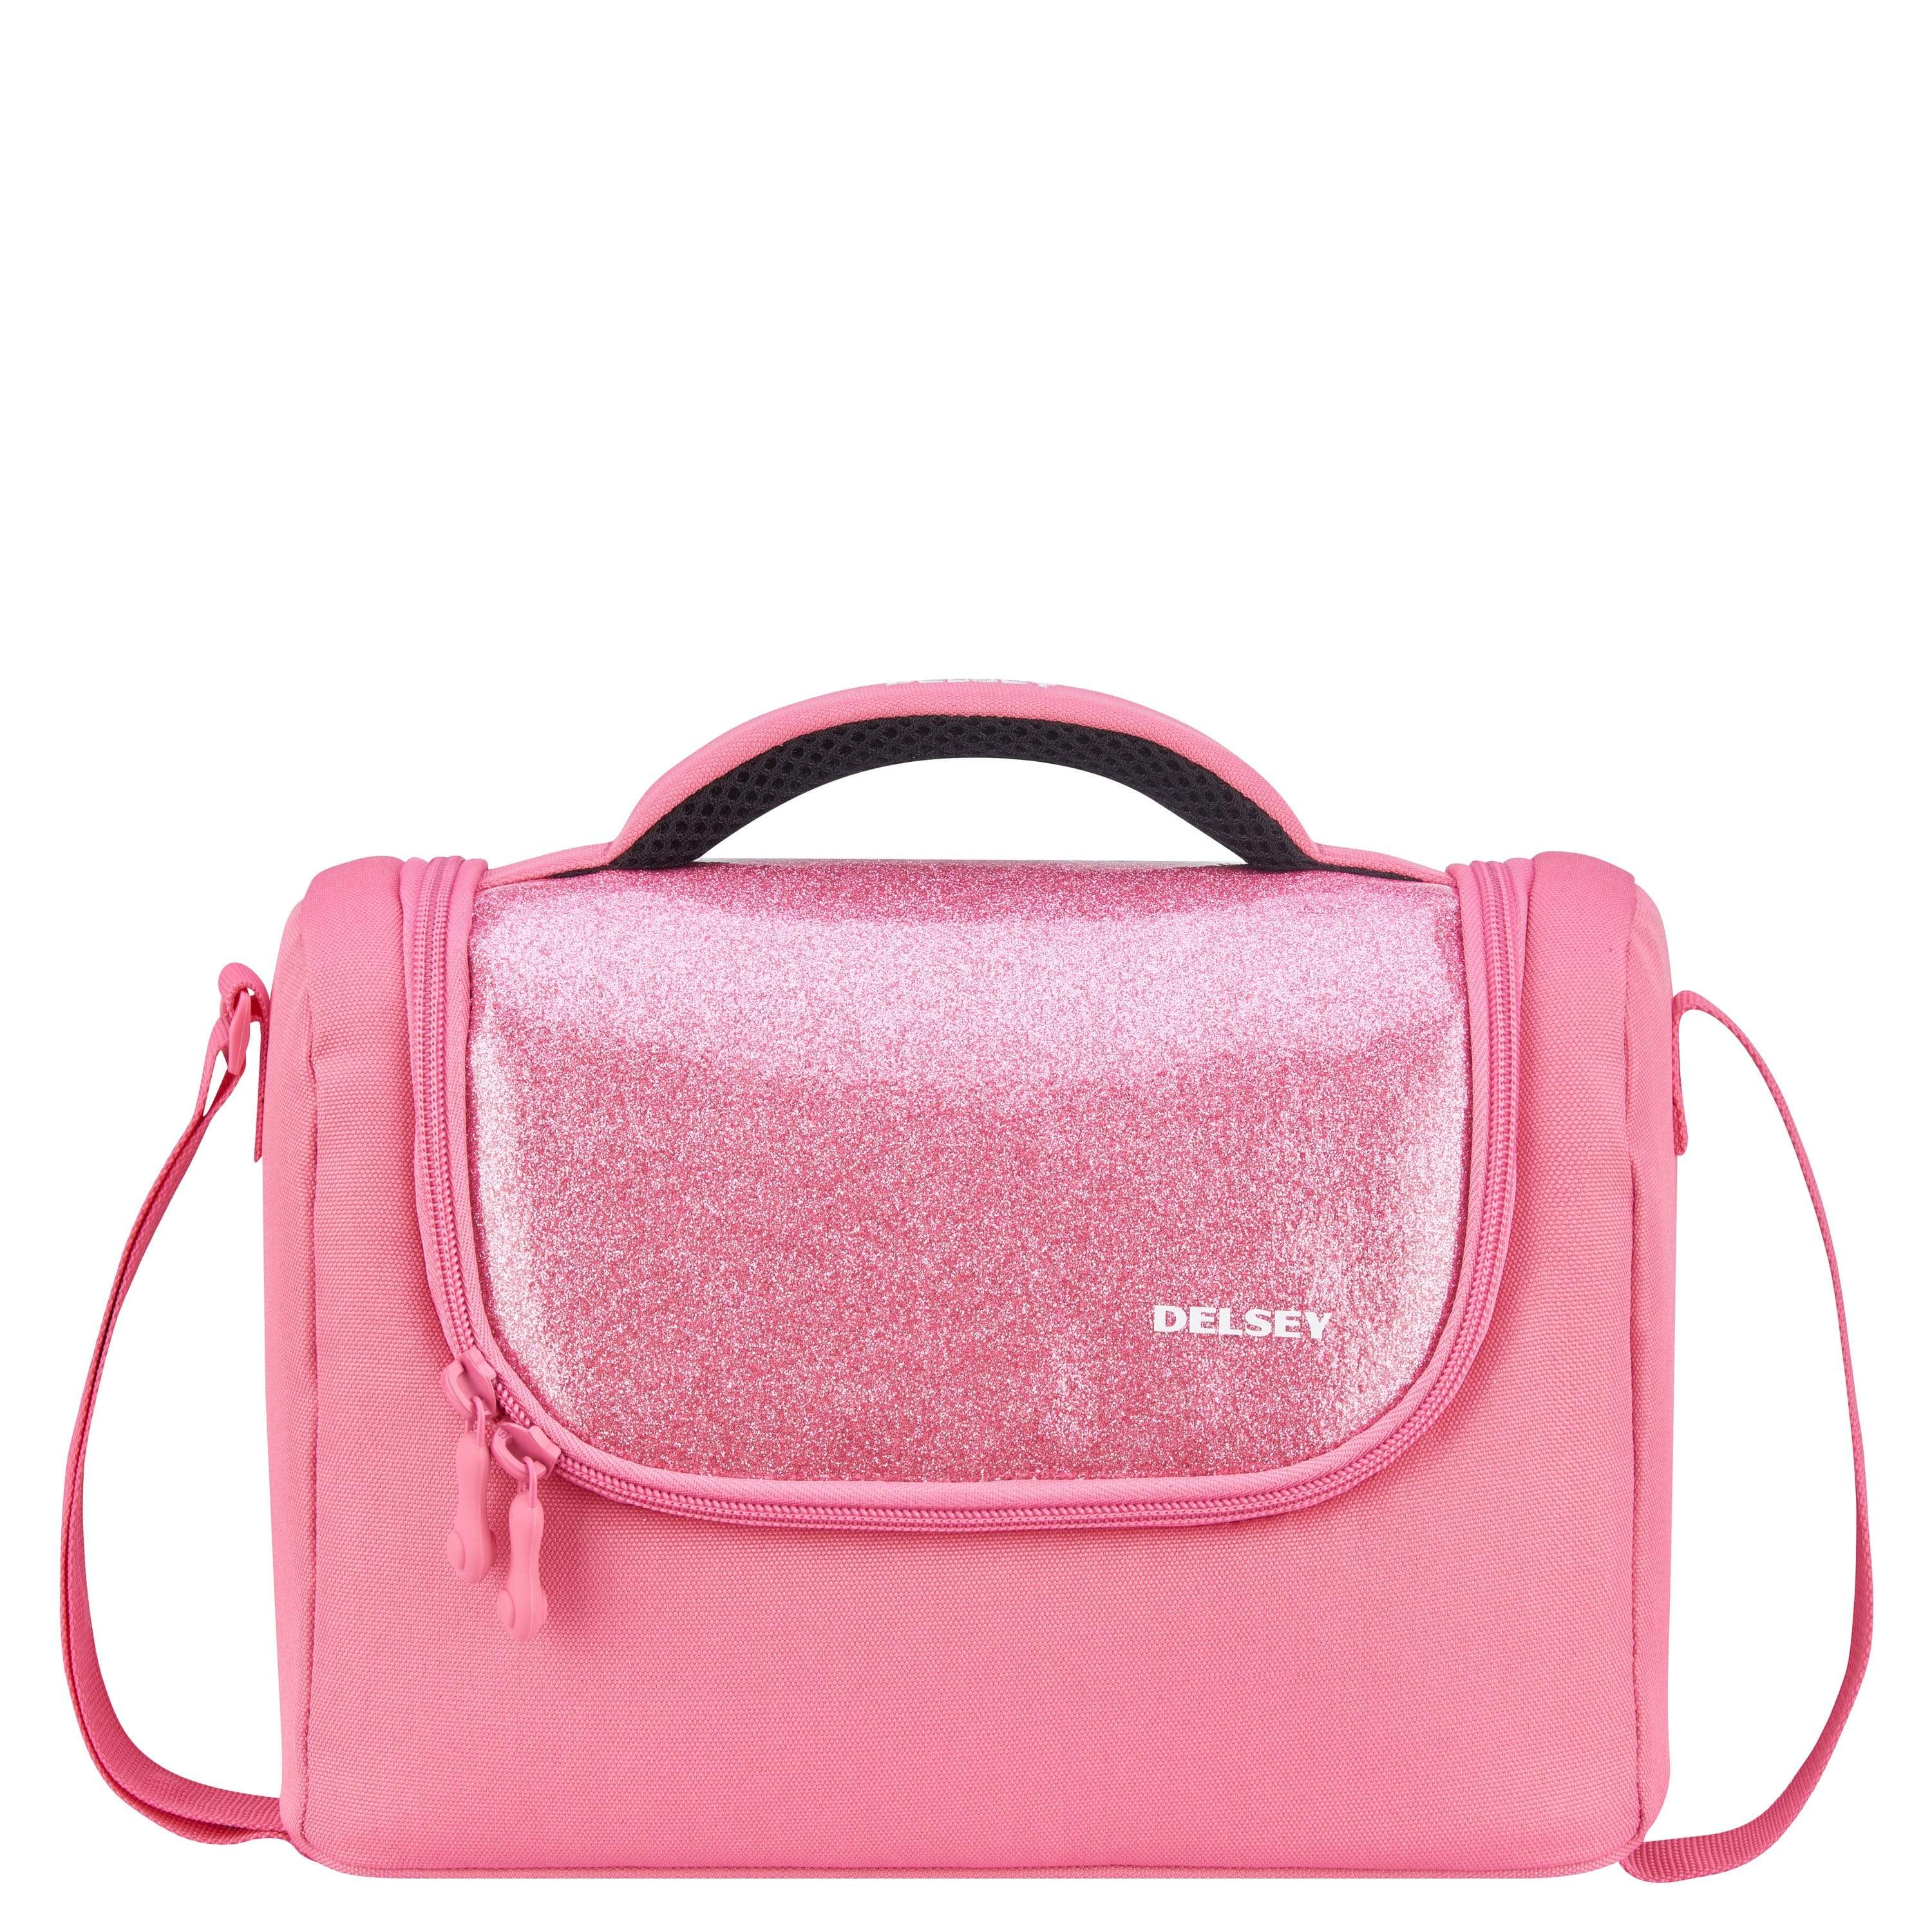 DELSEY SCHOOL 2019 ISOTHERM LUNCH BAG GLITTER PEONY 00339319009 PEONY